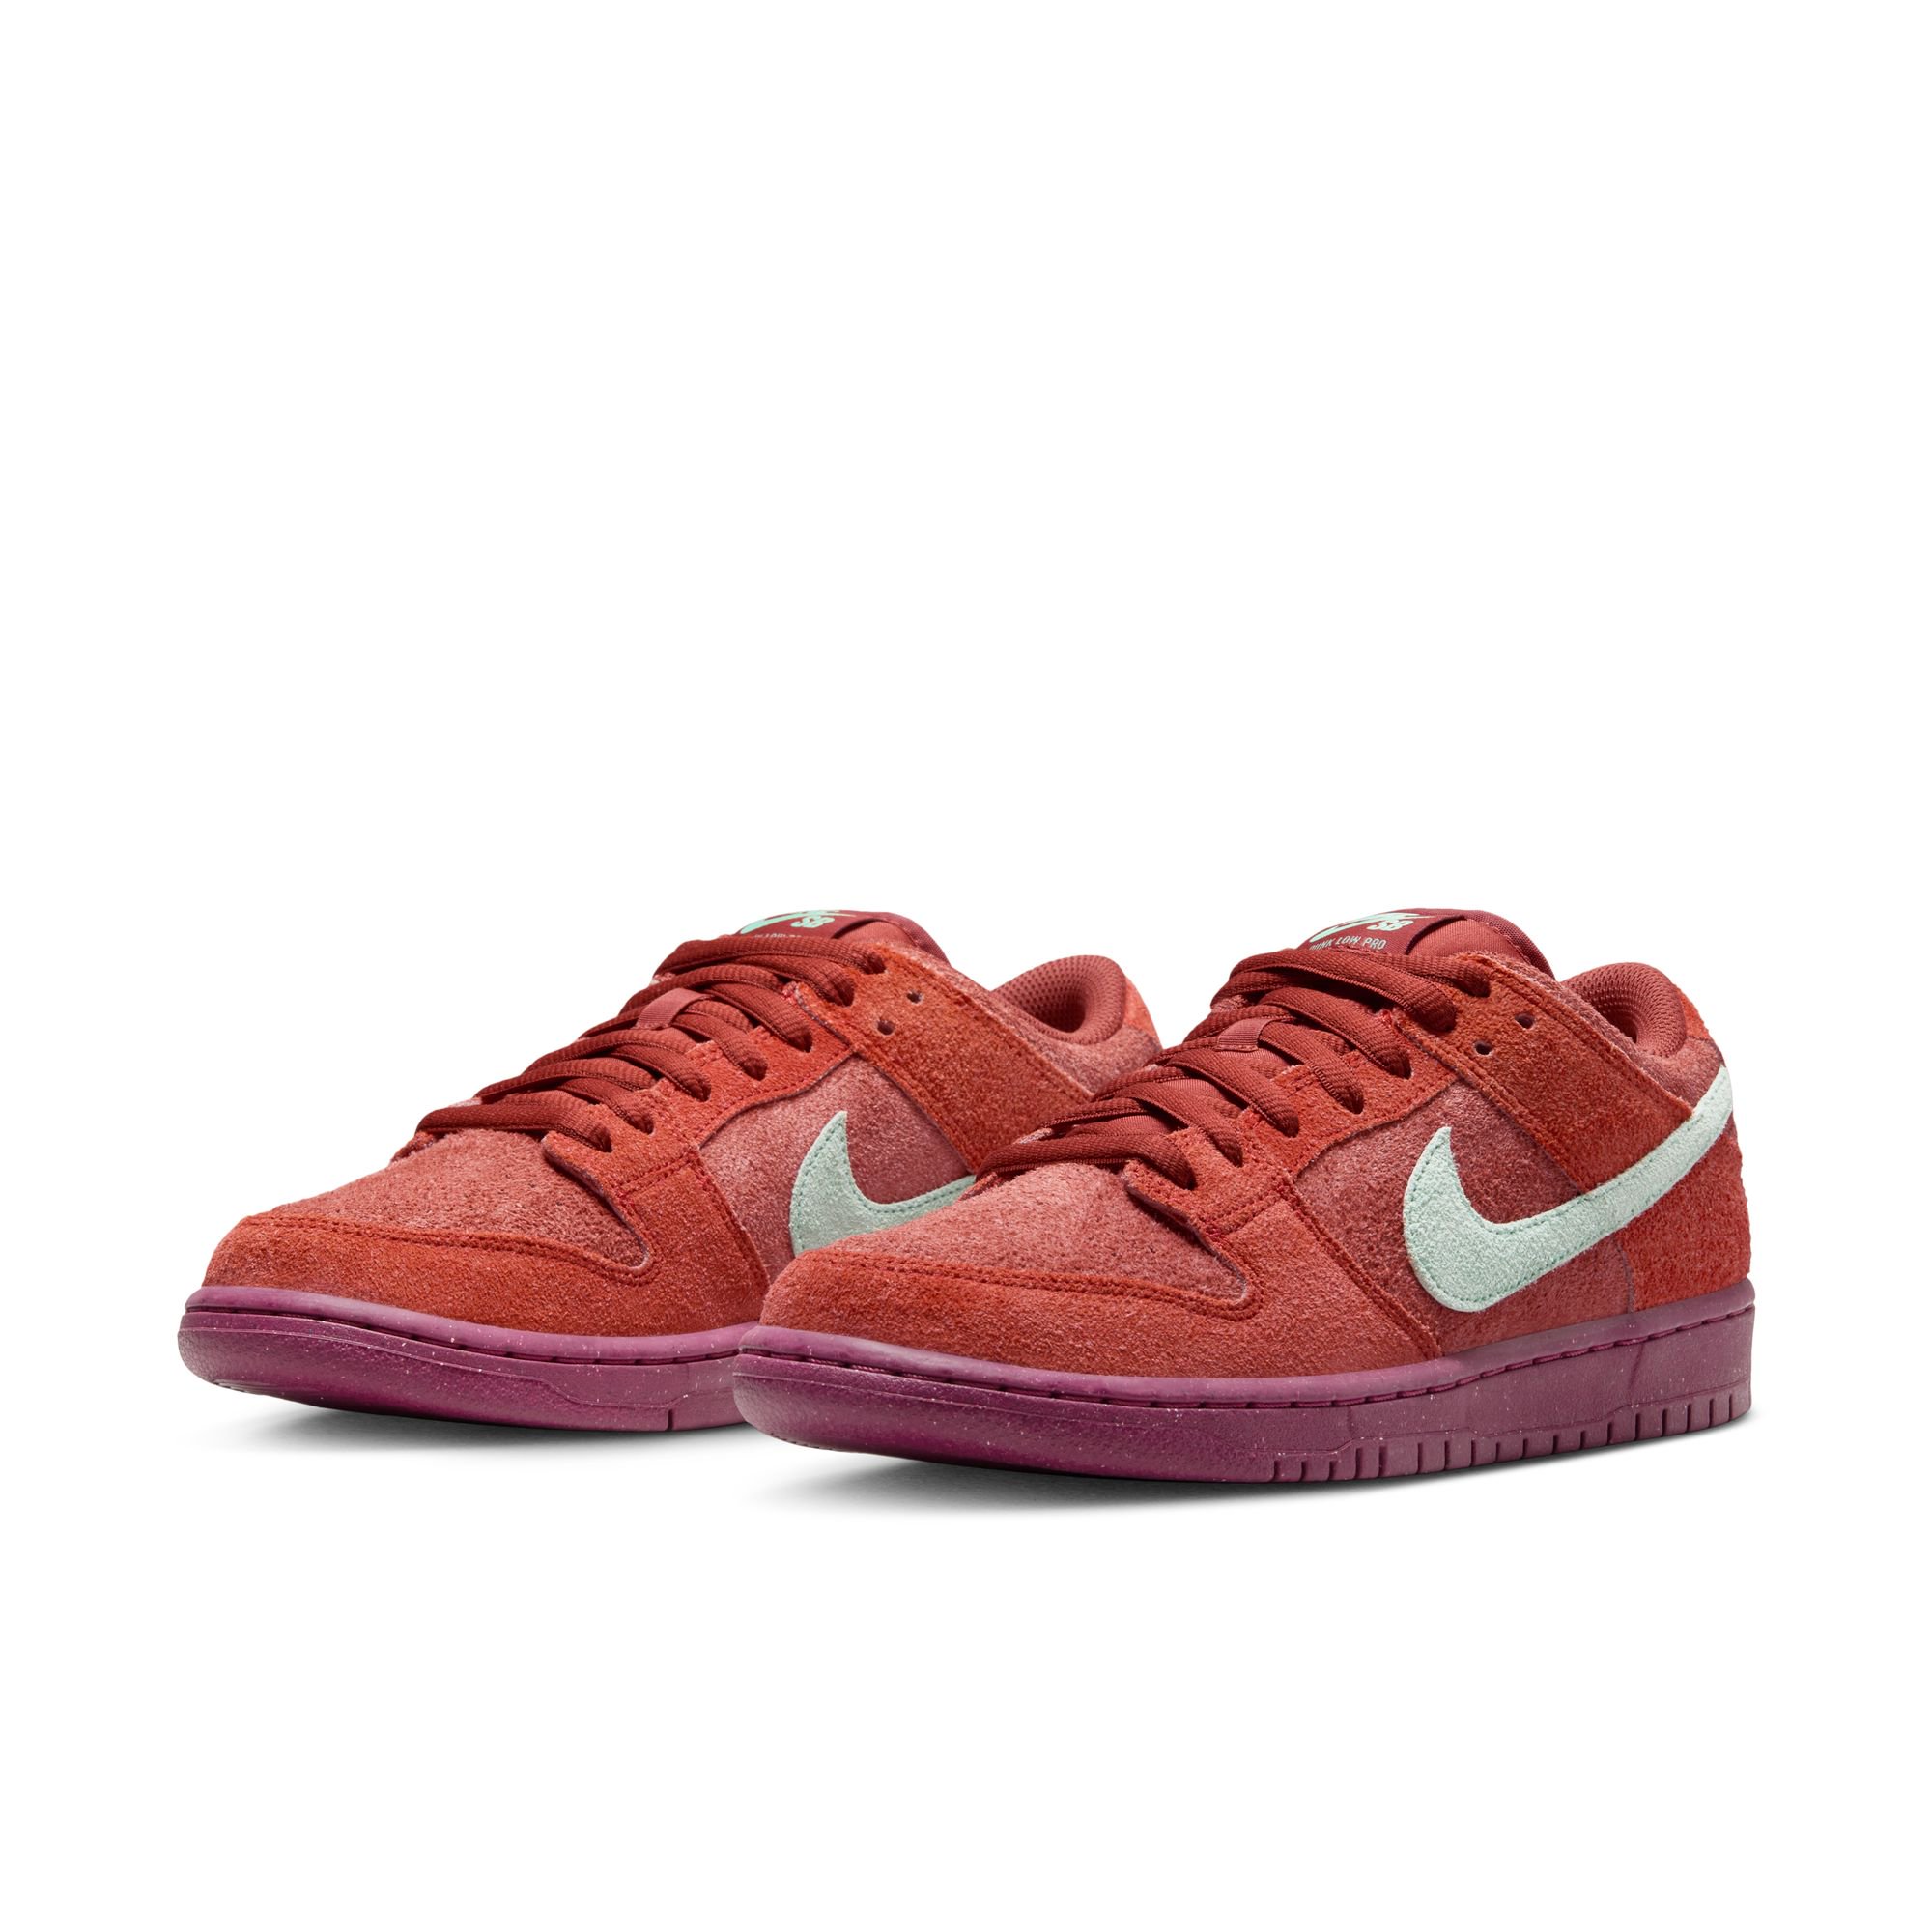 NIKESB DUNK LOW PRO PRM ”Mystic Red and Rosewood”(DV5429-601)